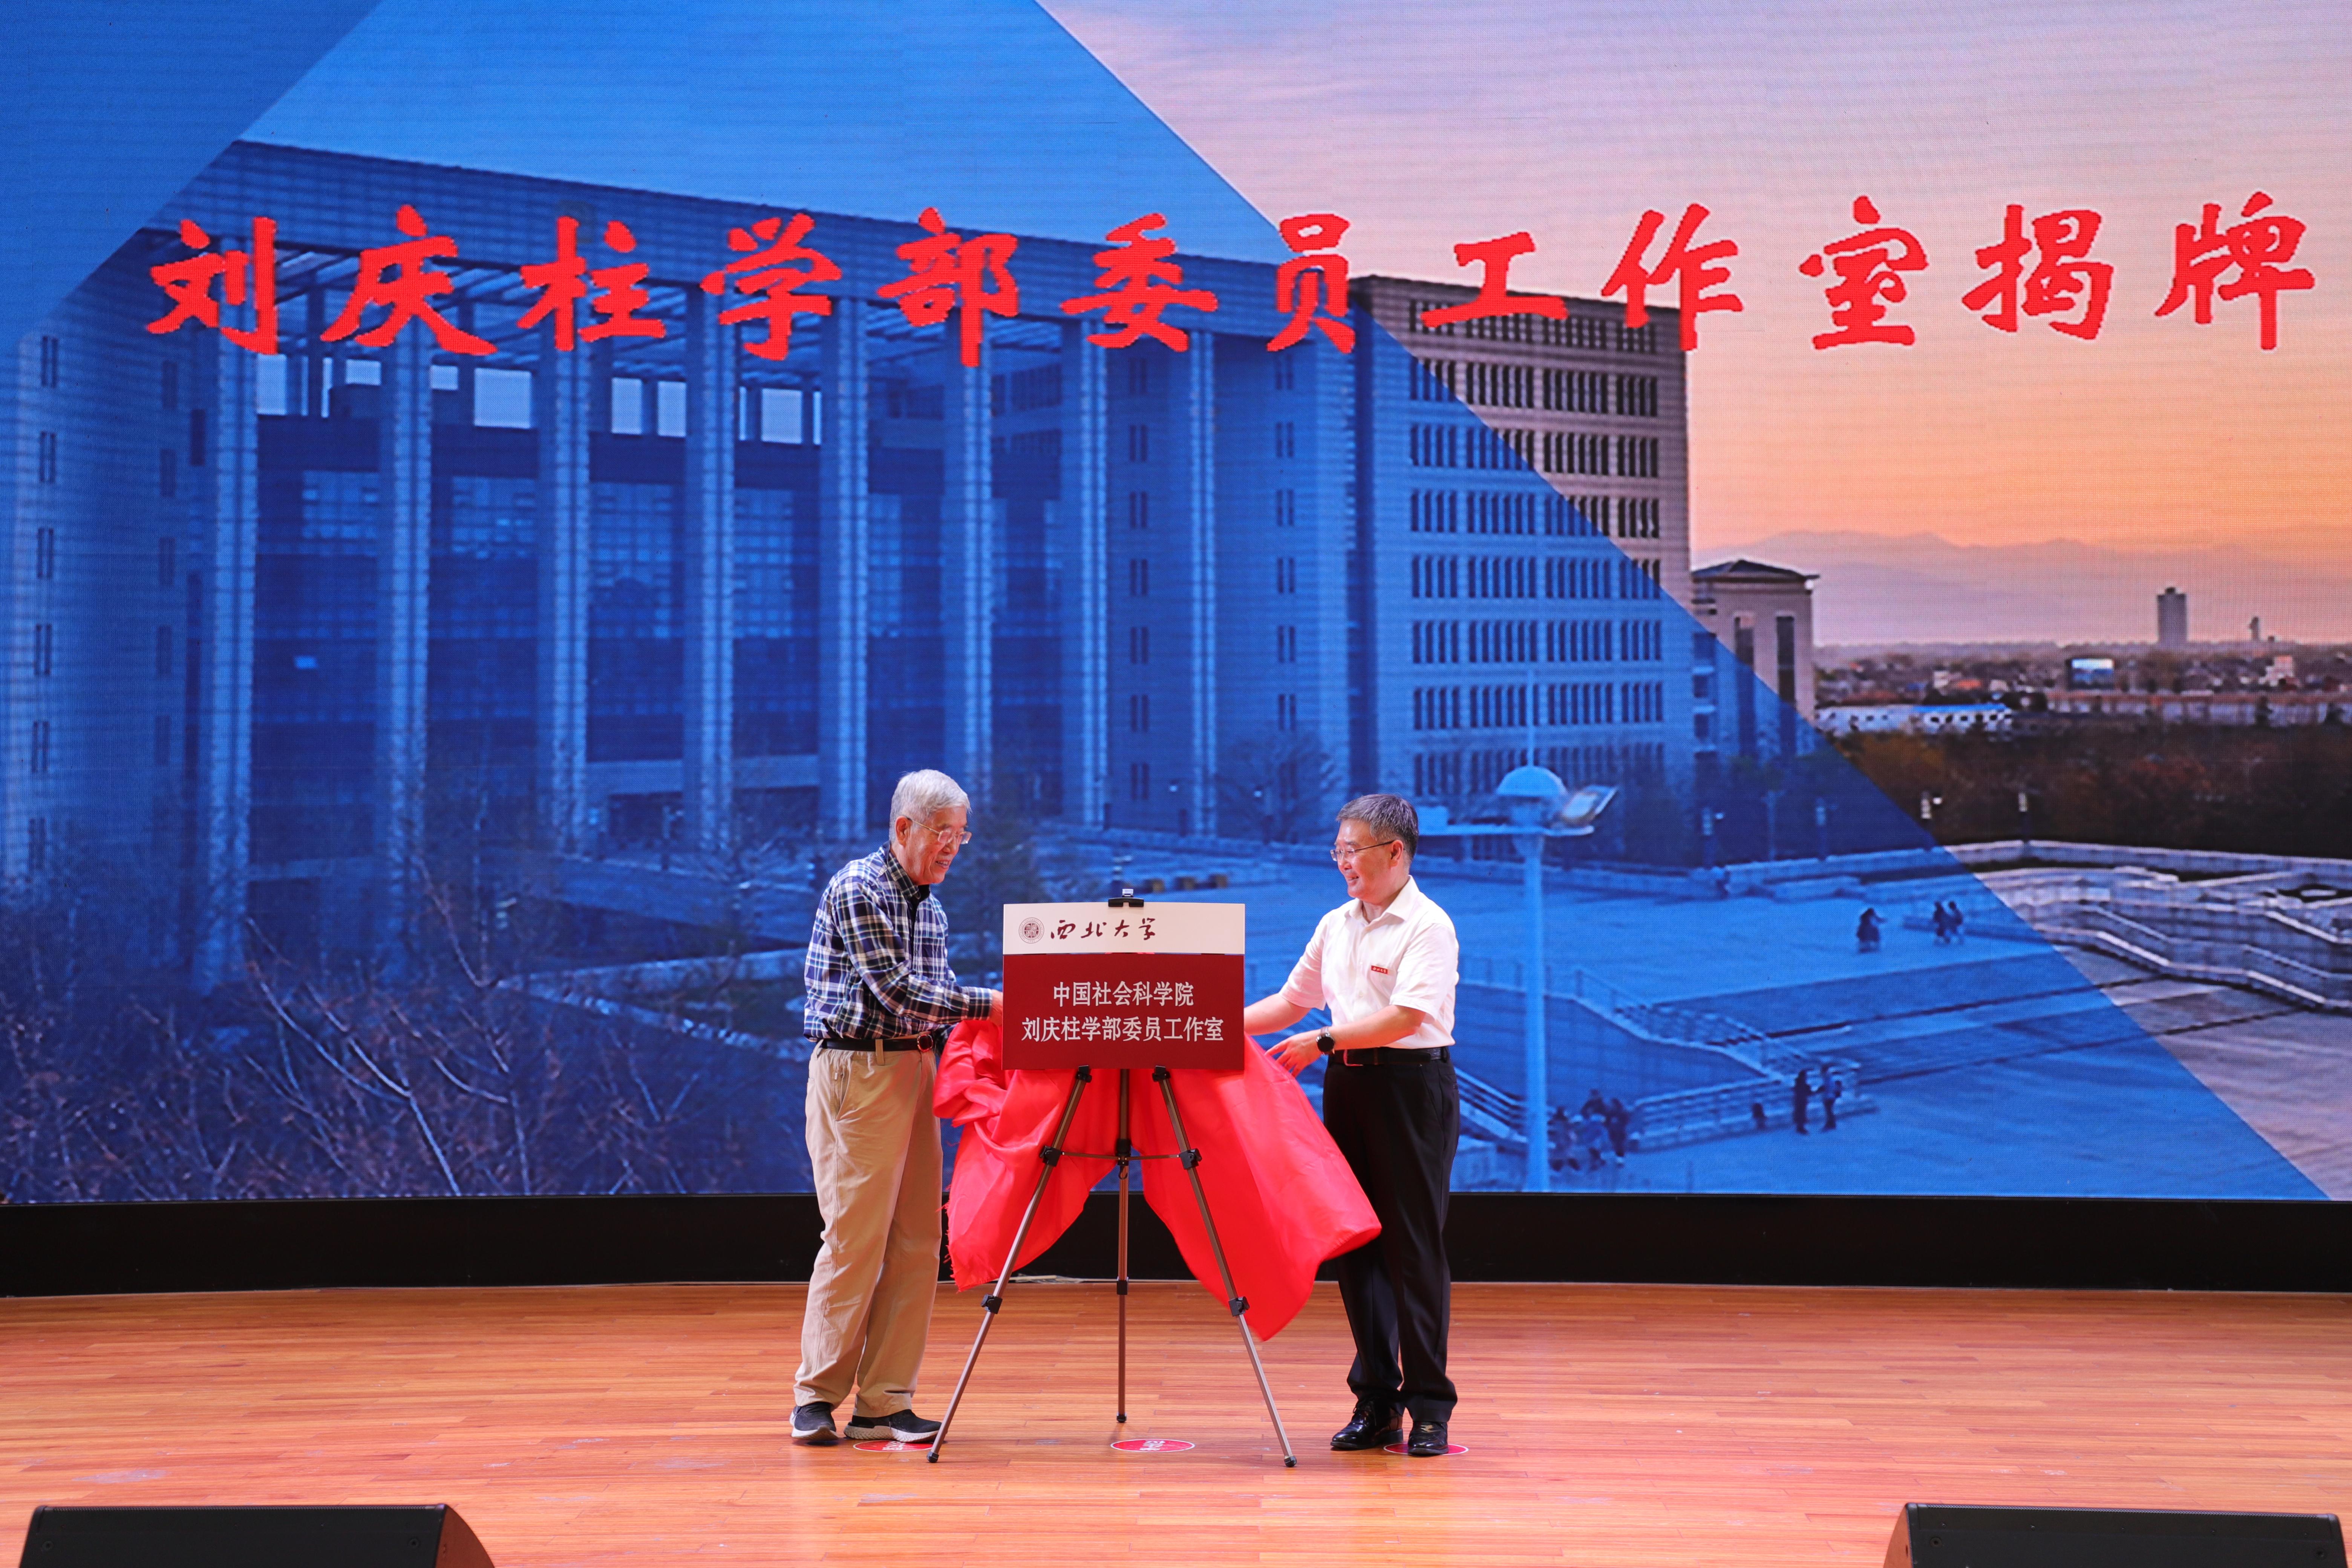 Our school held the opening ceremony of Liu Qingzhu's academic committee member's studio and the appointment ceremony of Li Yufang's distinguished professor